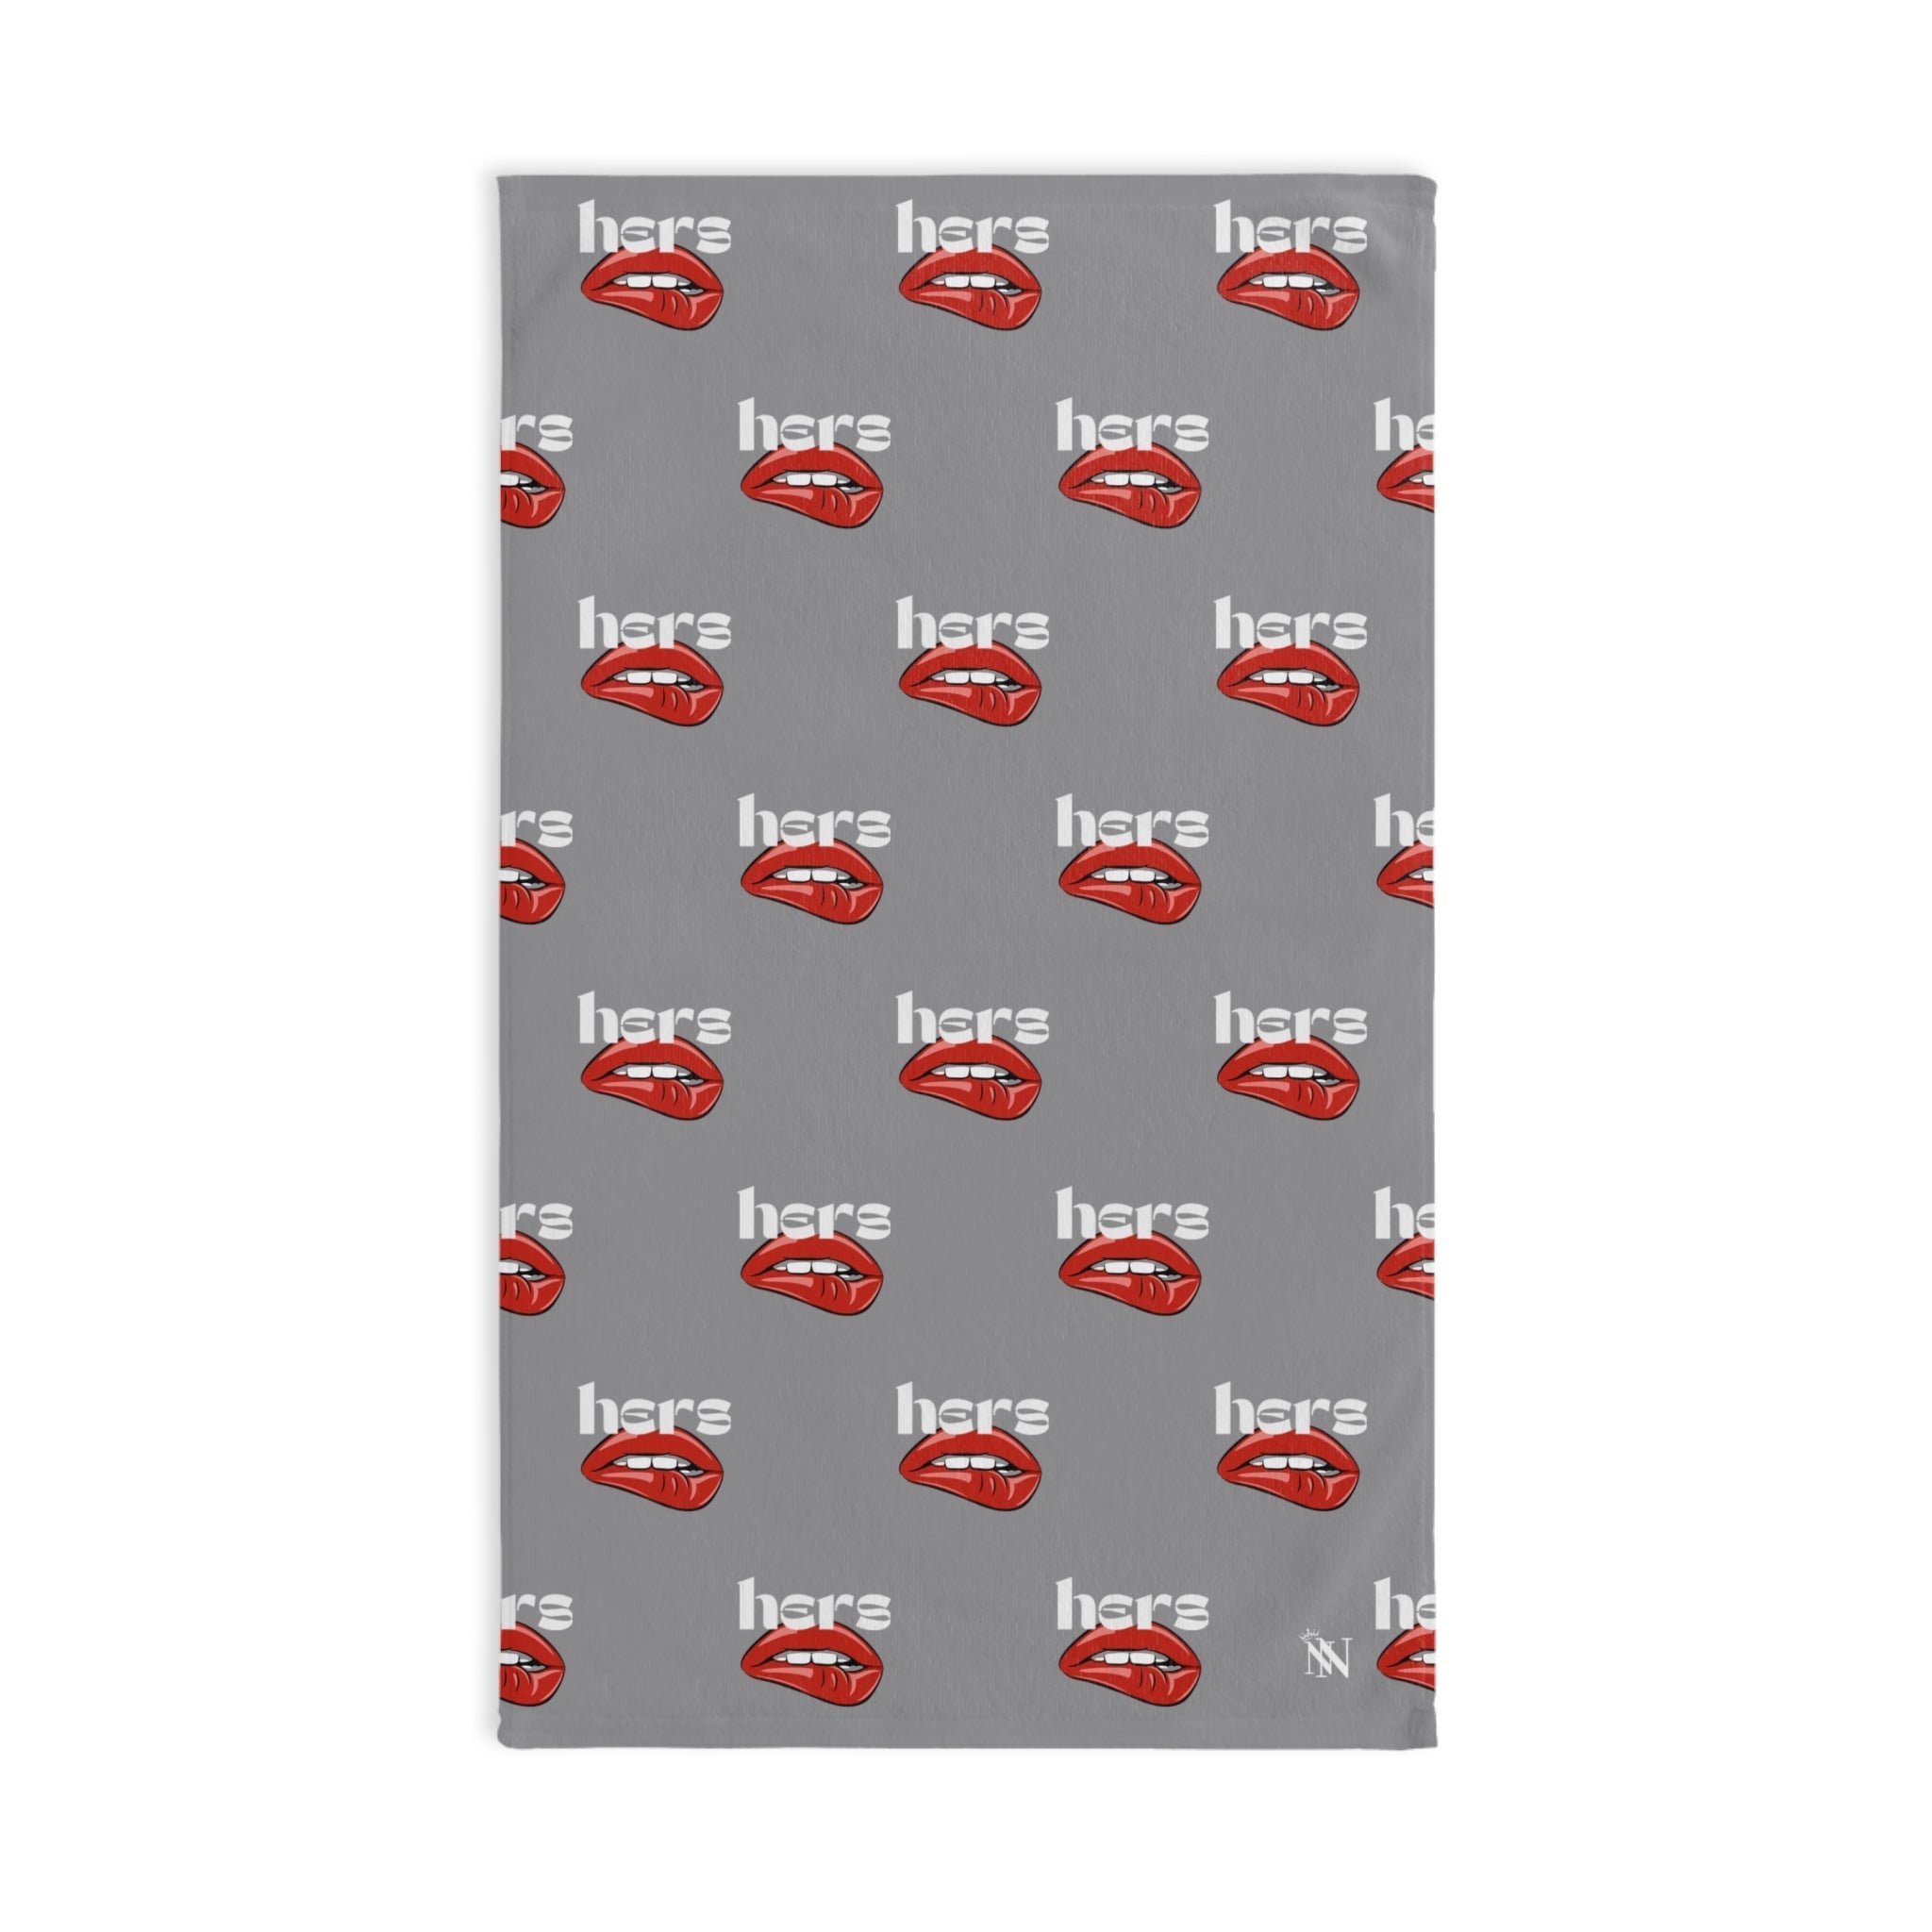 Bite Me Kiss Pattern  Grey | Anniversary Wedding, Christmas, Valentines Day, Birthday Gifts for Him, Her, Romantic Gifts for Wife, Girlfriend, Couples Gifts for Boyfriend, Husband NECTAR NAPKINS